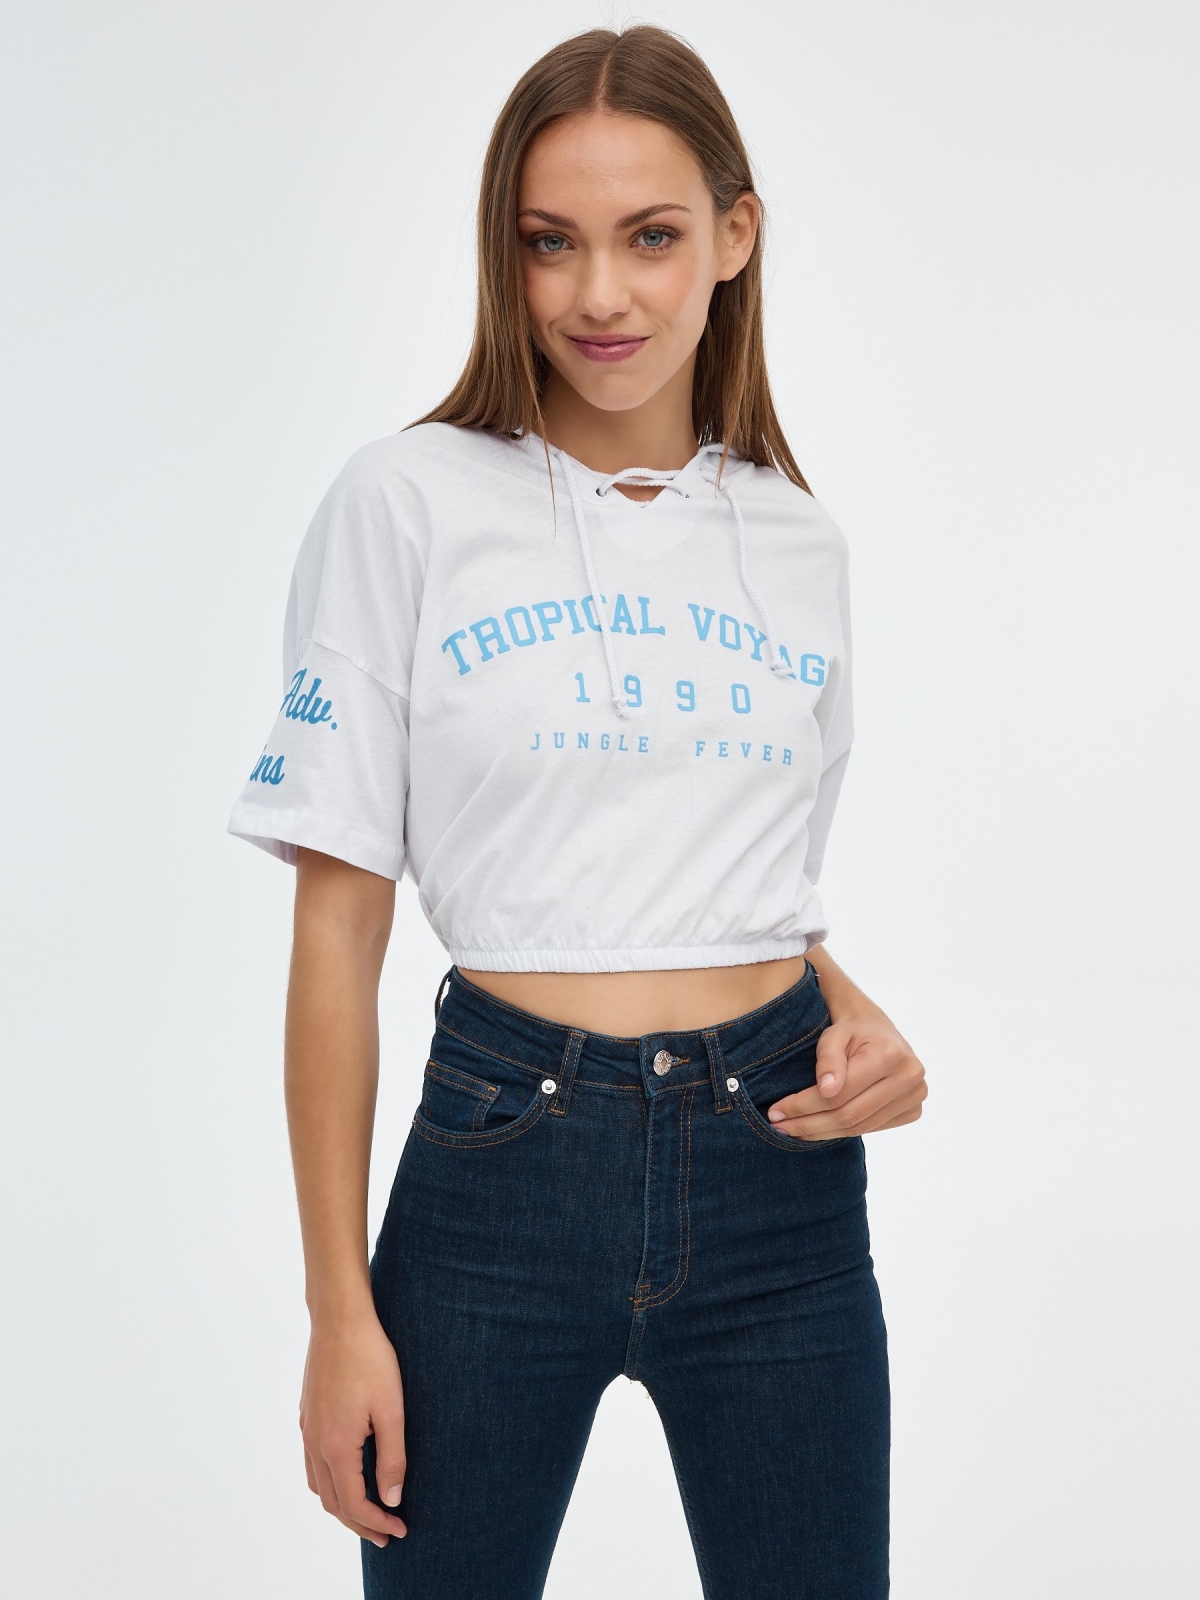 Tropical Voyage hooded t-shirt white middle front view